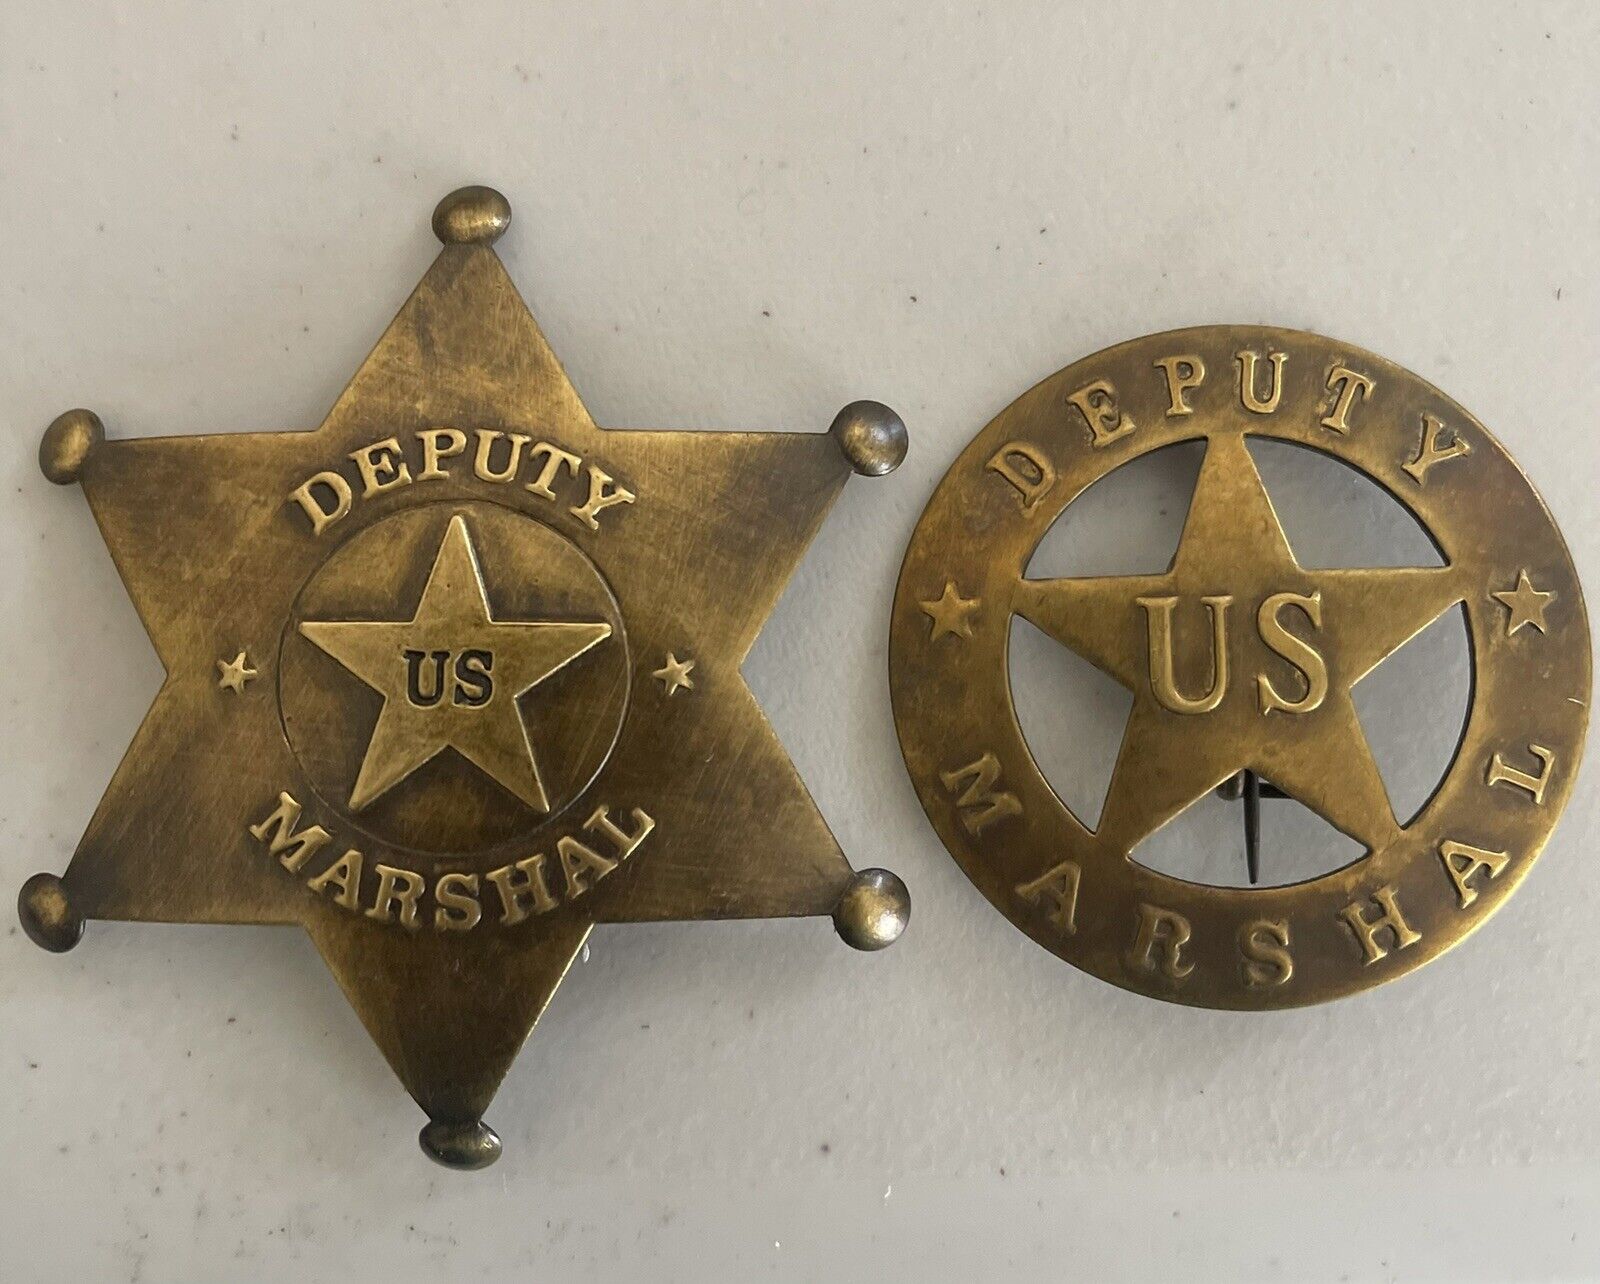 2 Deputy US Marshal Brass Badge Replica Old West Sheriff Souvenirs ￼